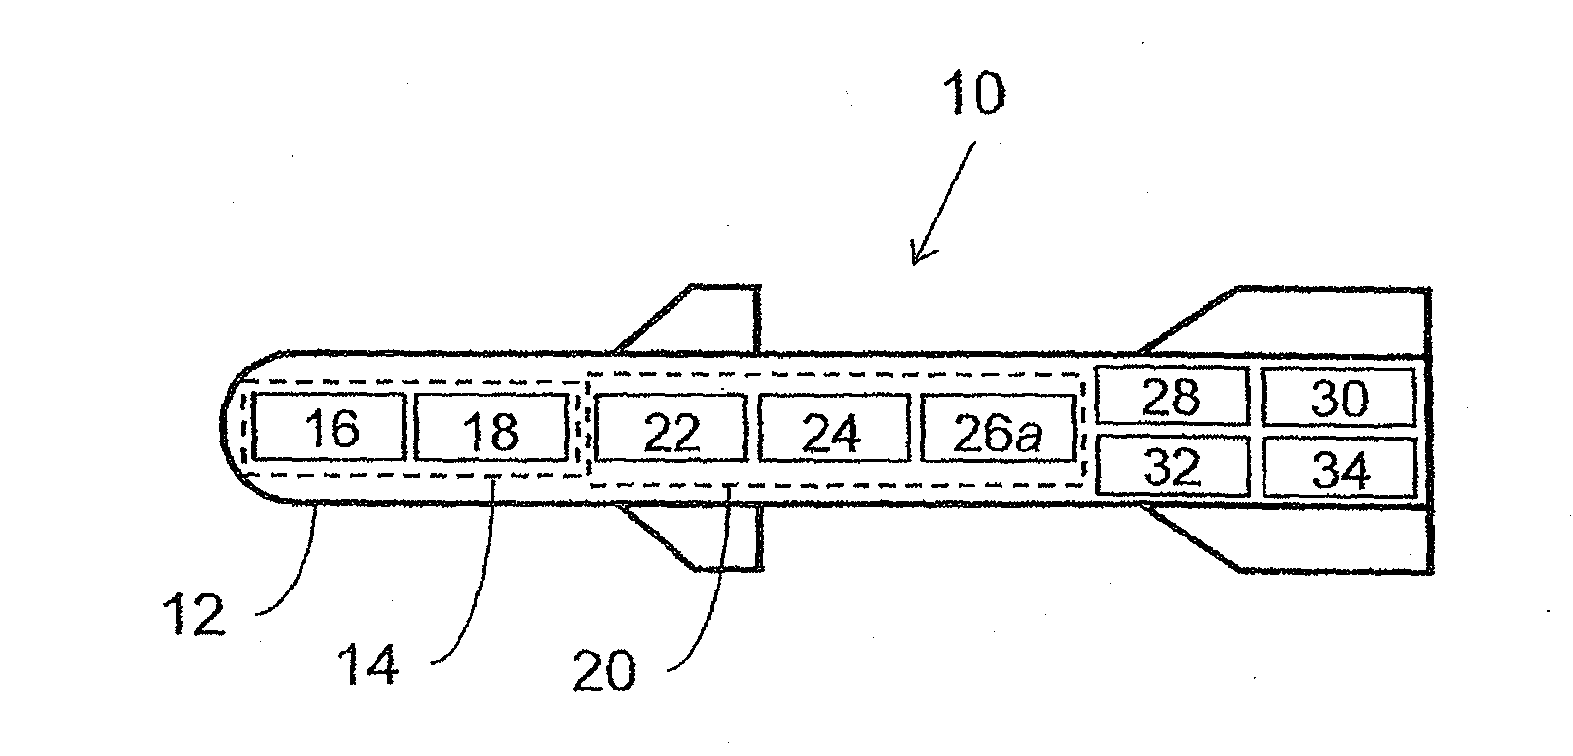 Missile system with navigation capability based on image processing